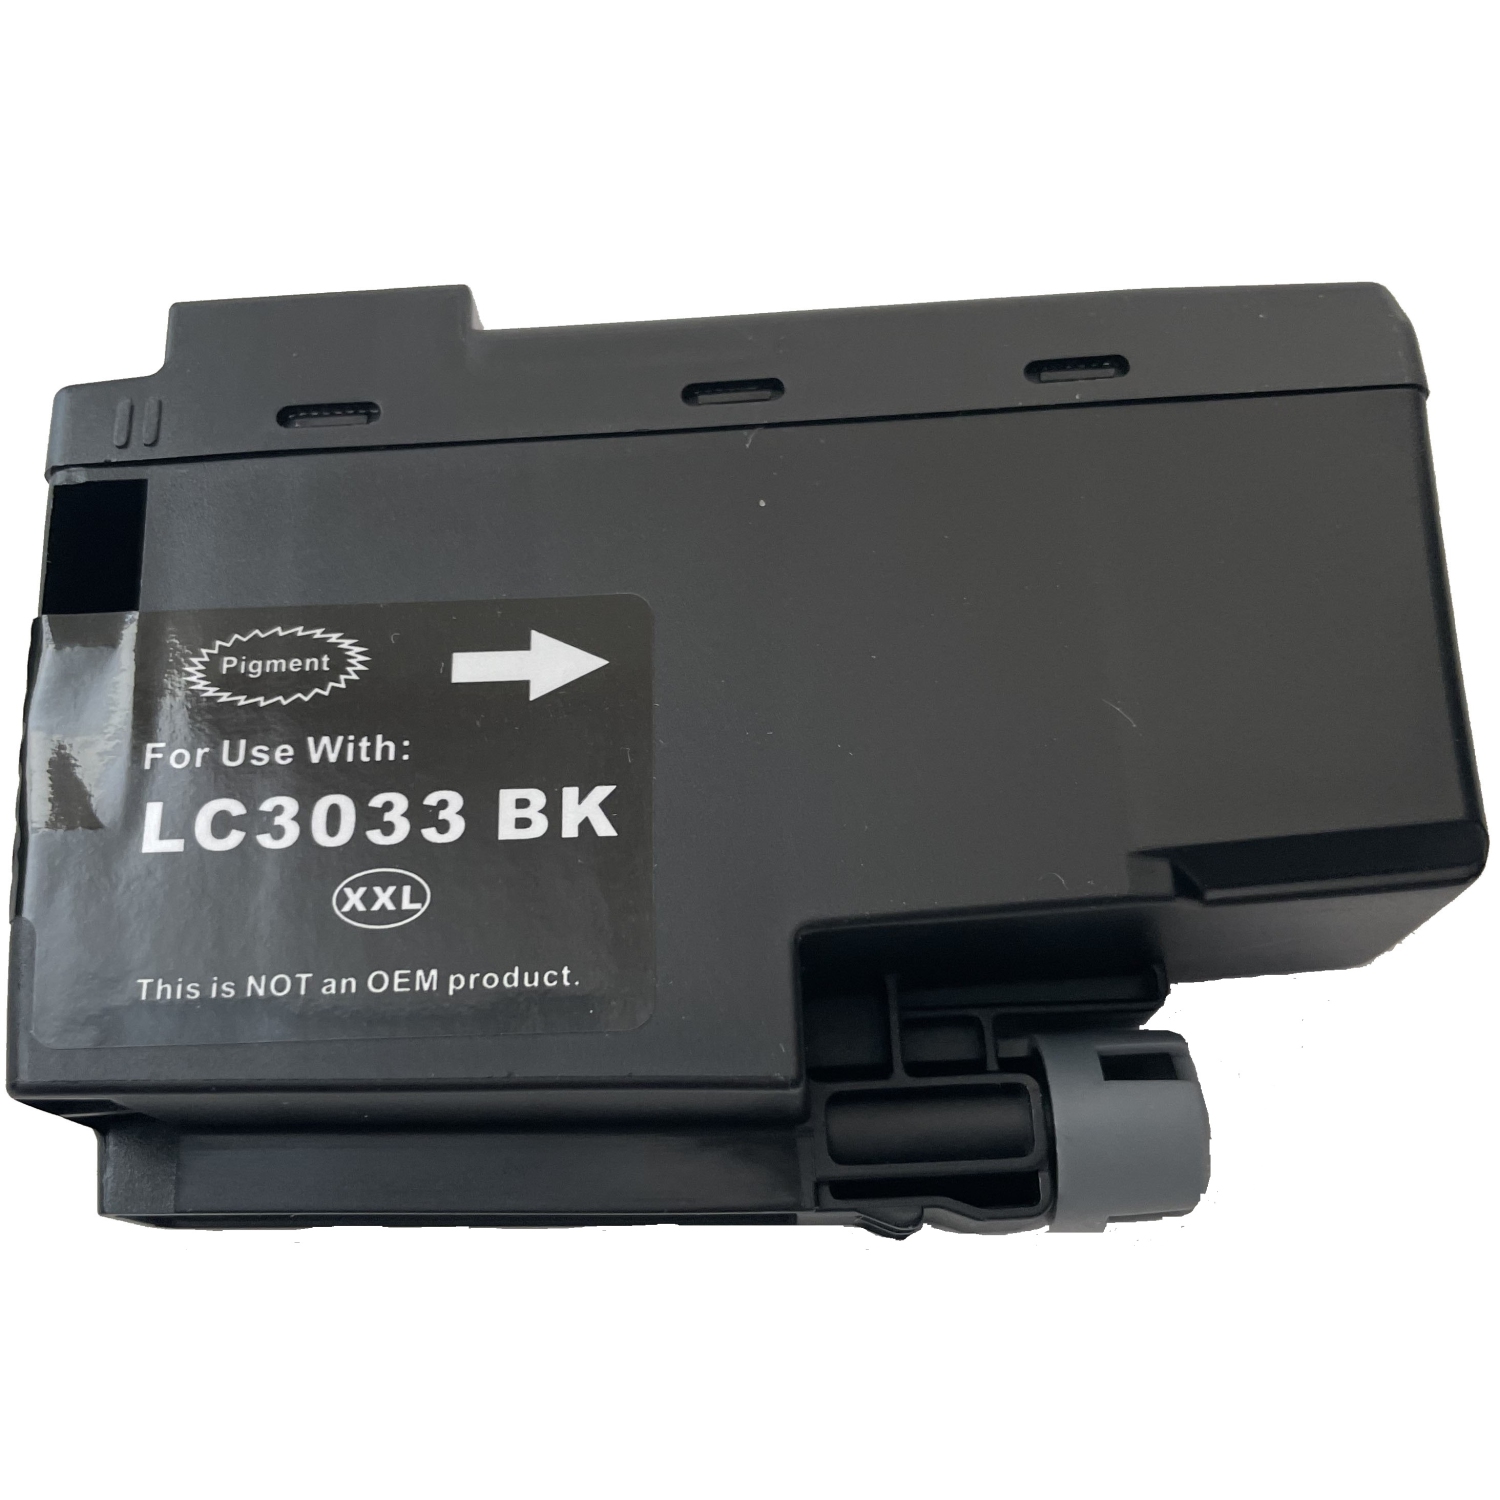 TONER4U - 1 Black Ink Cartridge Compatible LC3033 XXL Extra High Yield for Brother LC3033 MFC-J805DW, MFC-J995DW, MFC-J995DWX